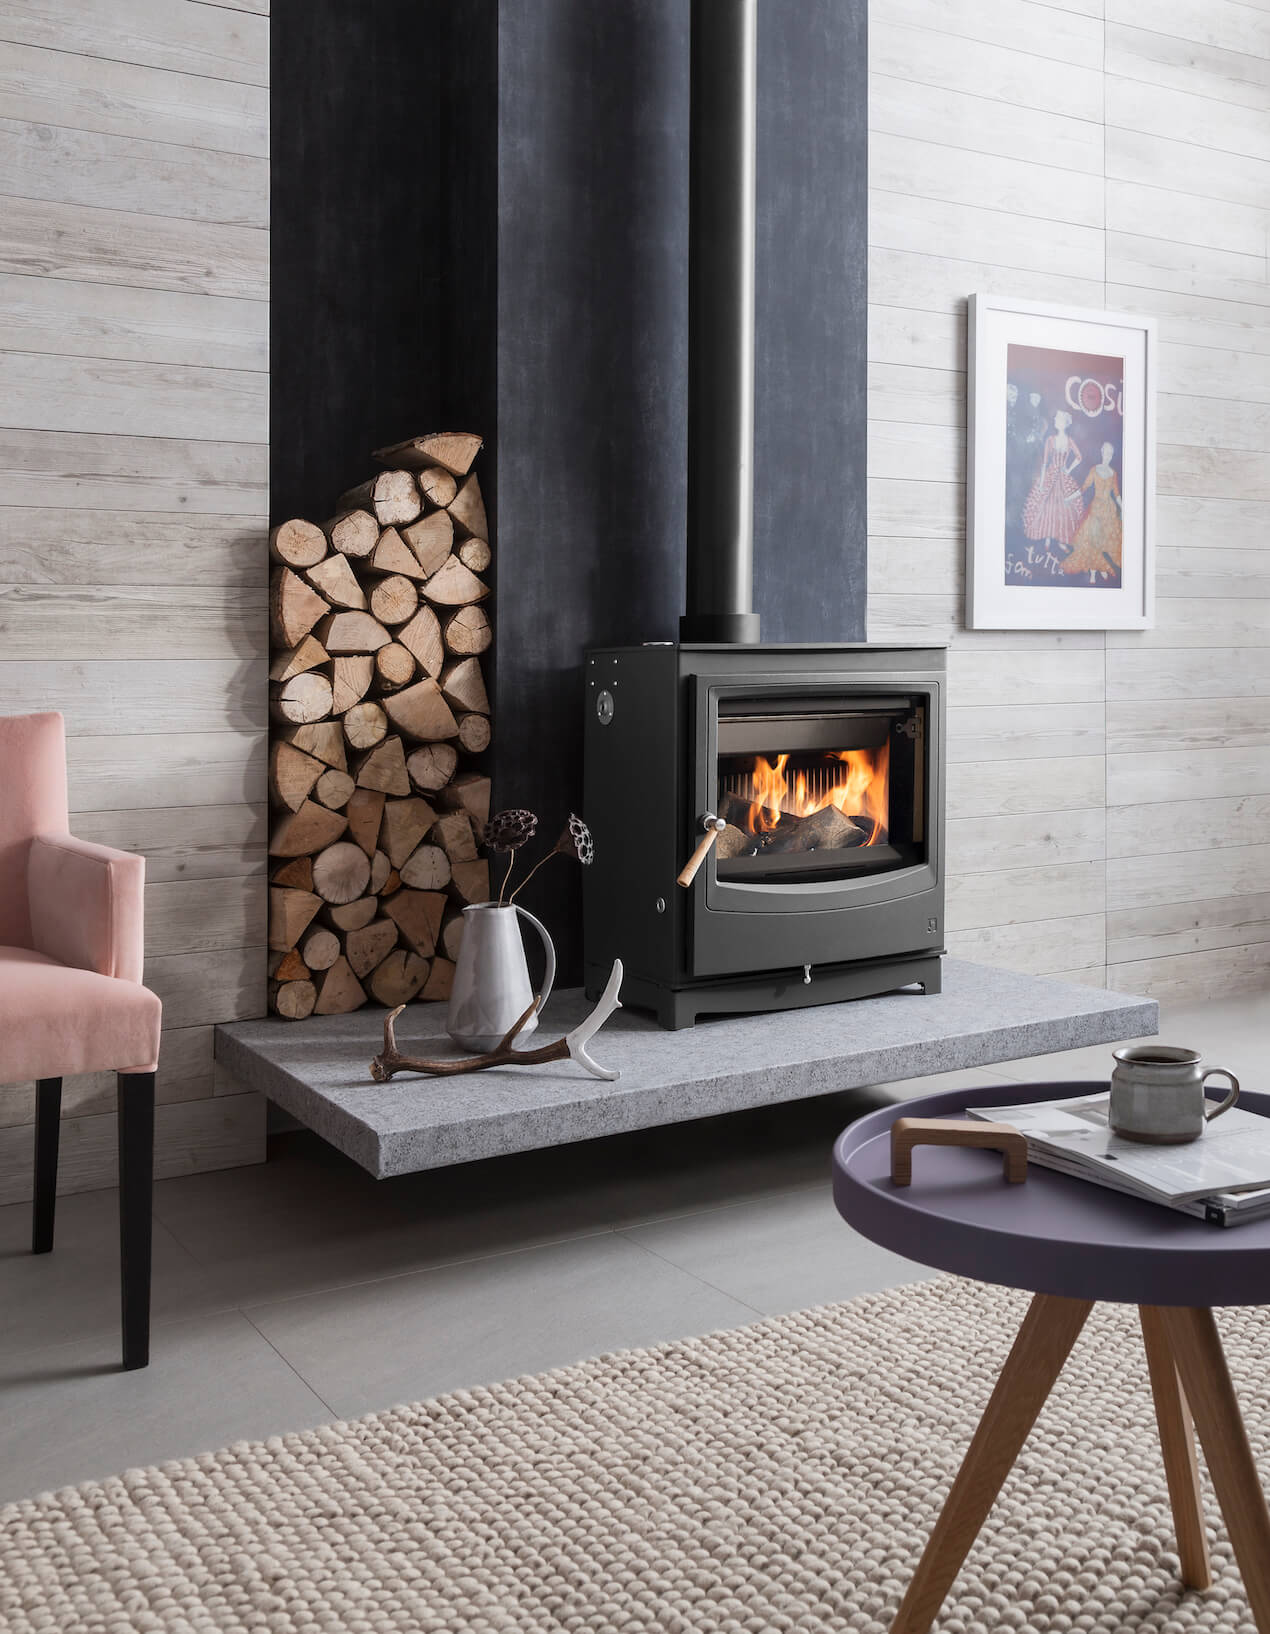 7 snuggly fireplaces settings to inspire you in time for Christmas by interior stylist & lifestyle blogger Maxine Brady from We Love Home blog